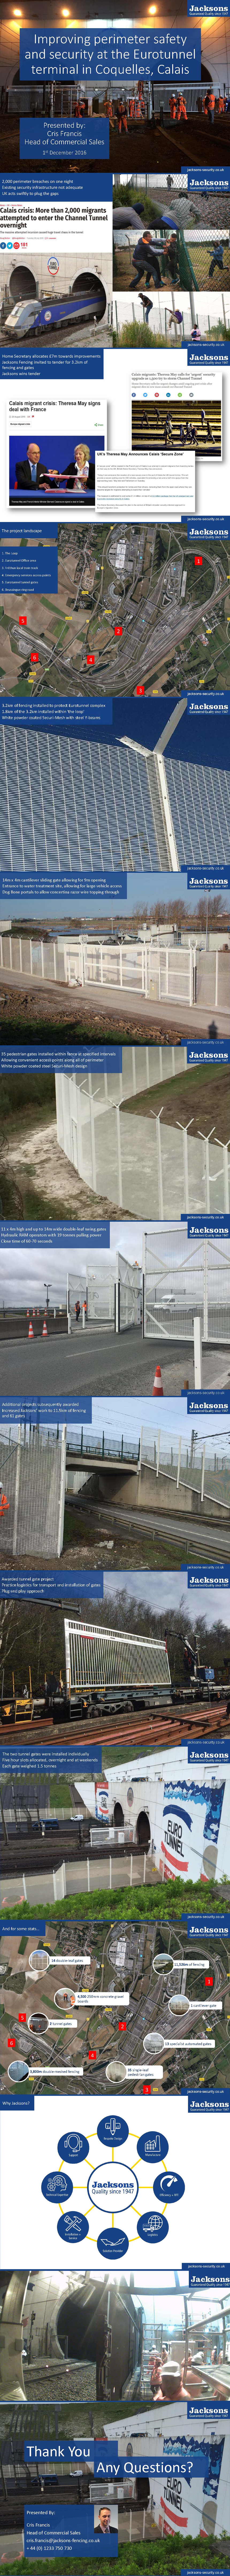 Jacksons: Improving perimeter security and safety for the Eurotunnel